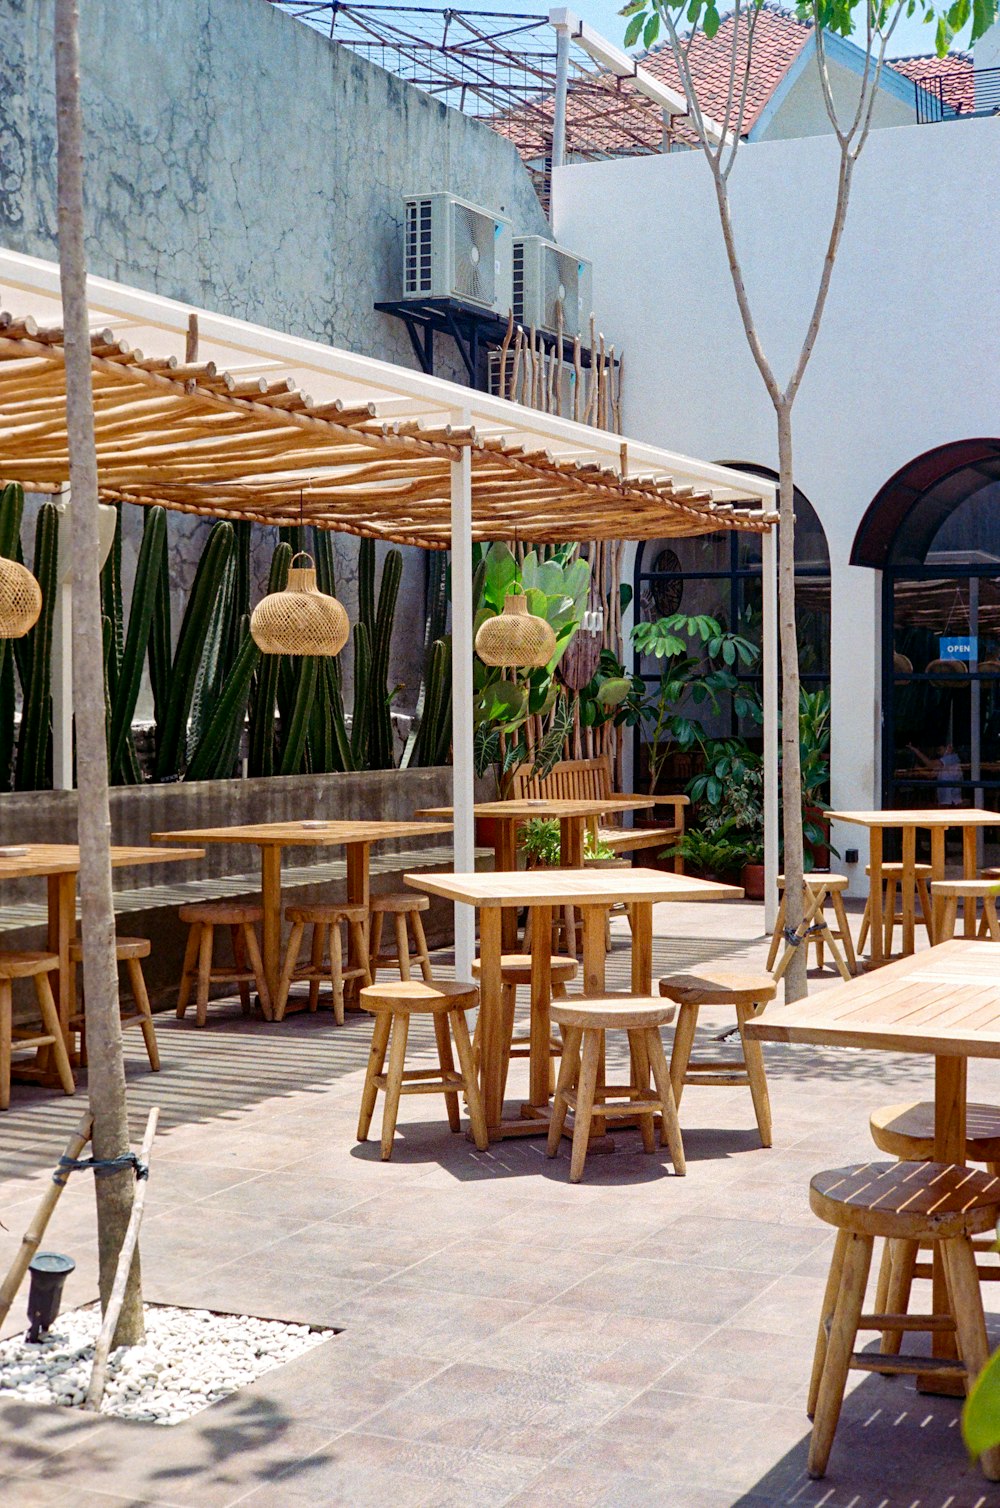 a patio area with tables and chairs and umbrellas